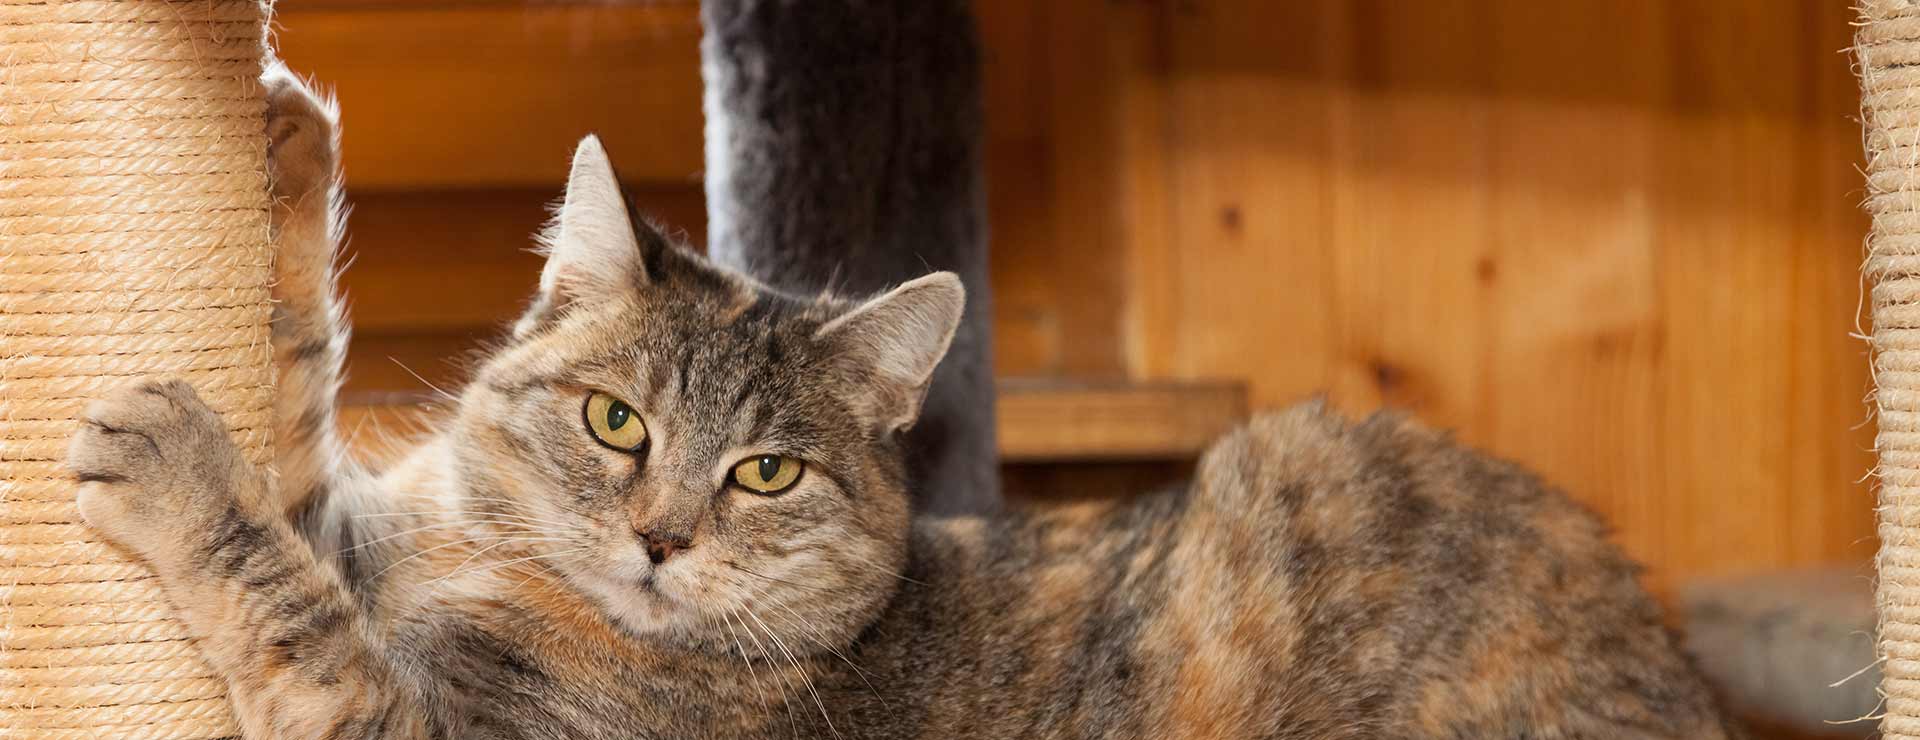 Lavender Oil for Cats: Is it Safe? | Nikura